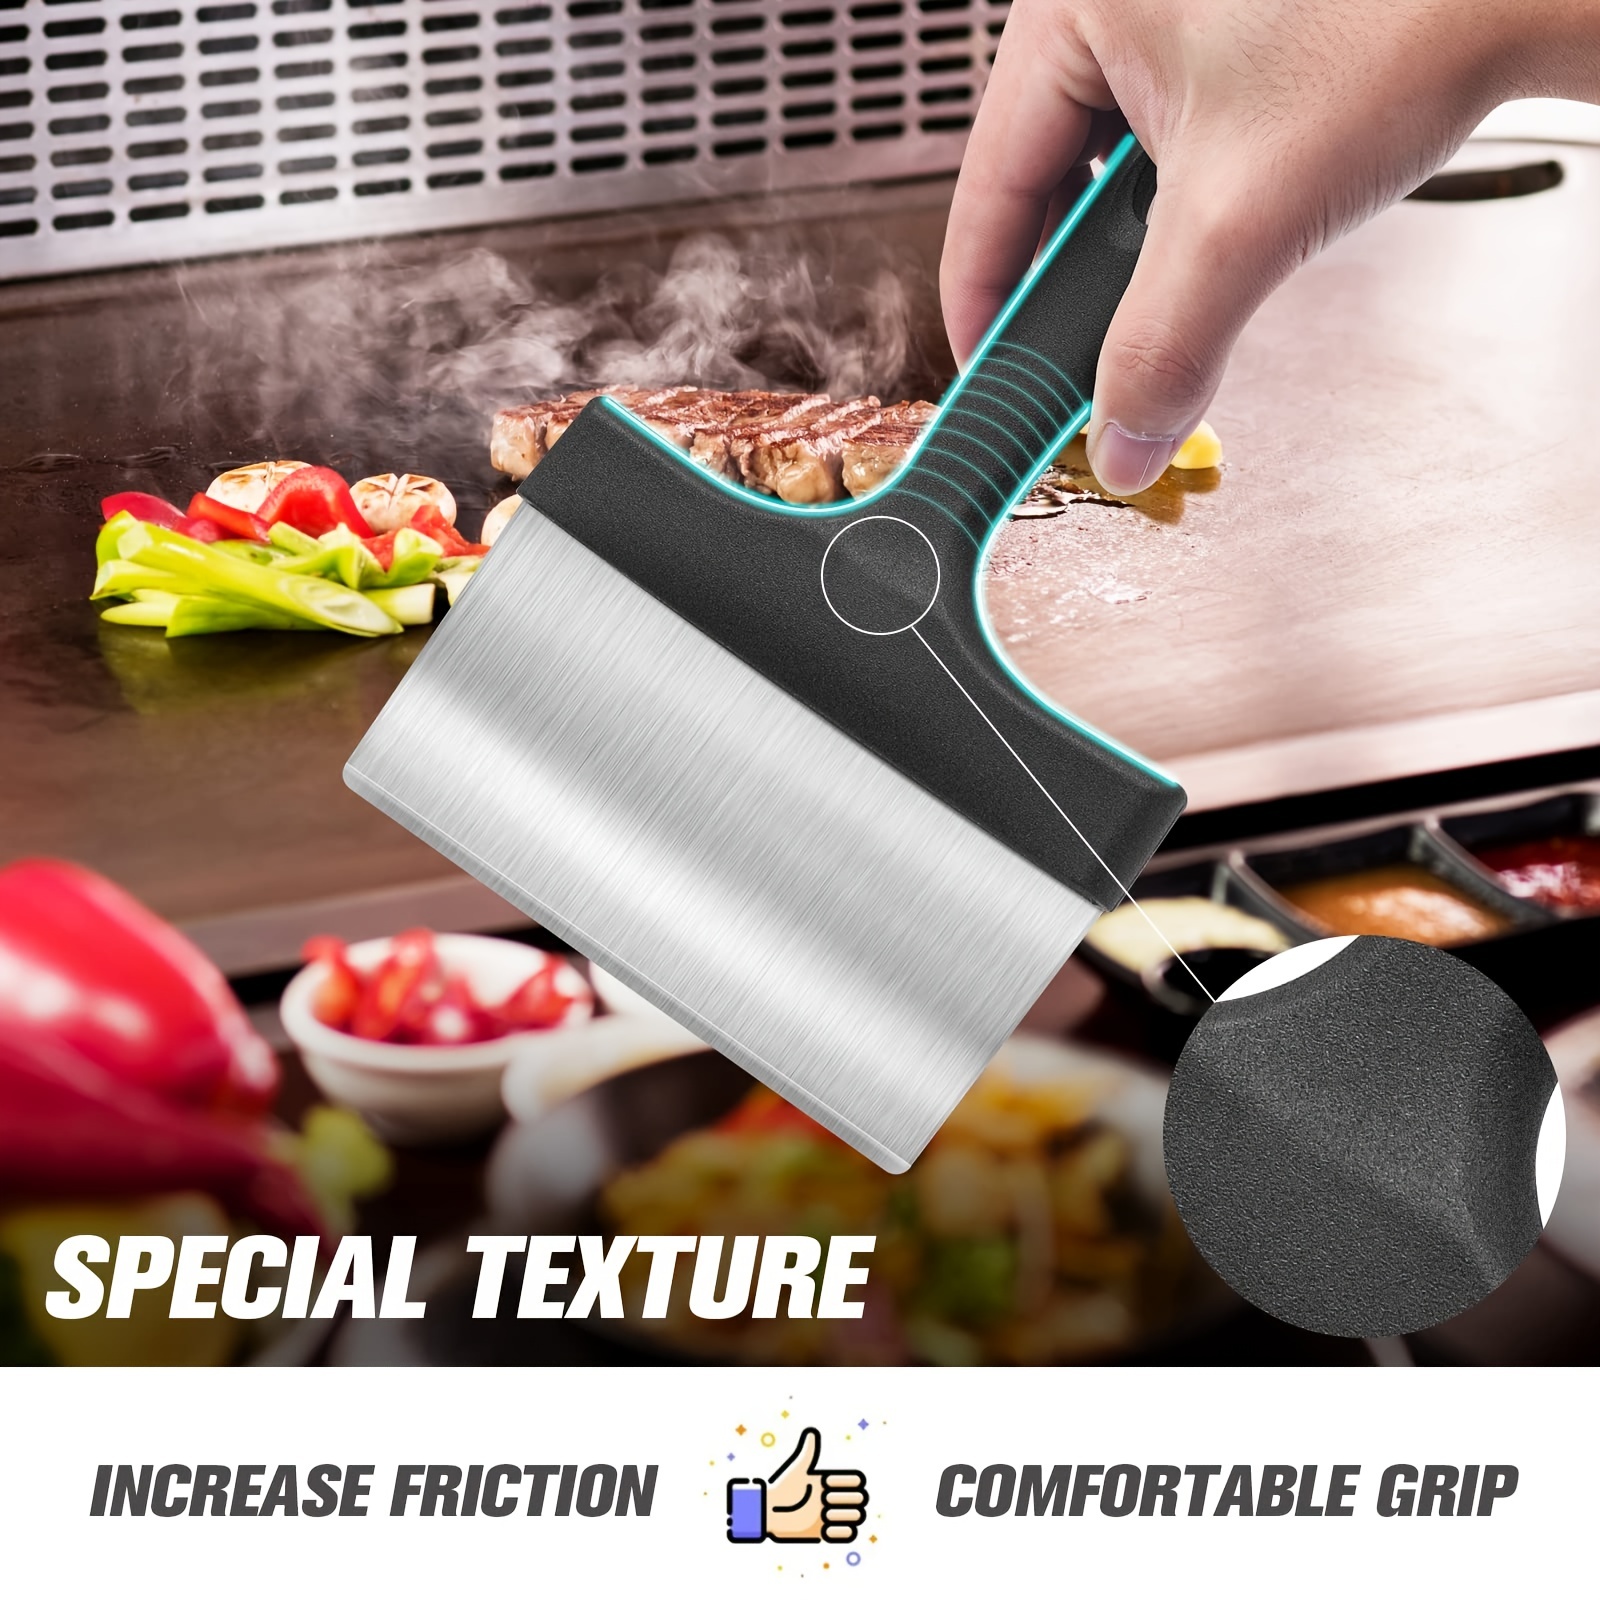 Heavy Duty Grill Scraper Stainless Steel Griddle Scraper with 5  Handle,Sturdy Food Scraper Tool Kitchen for Blackstone Grill  Accessories,Outdoor